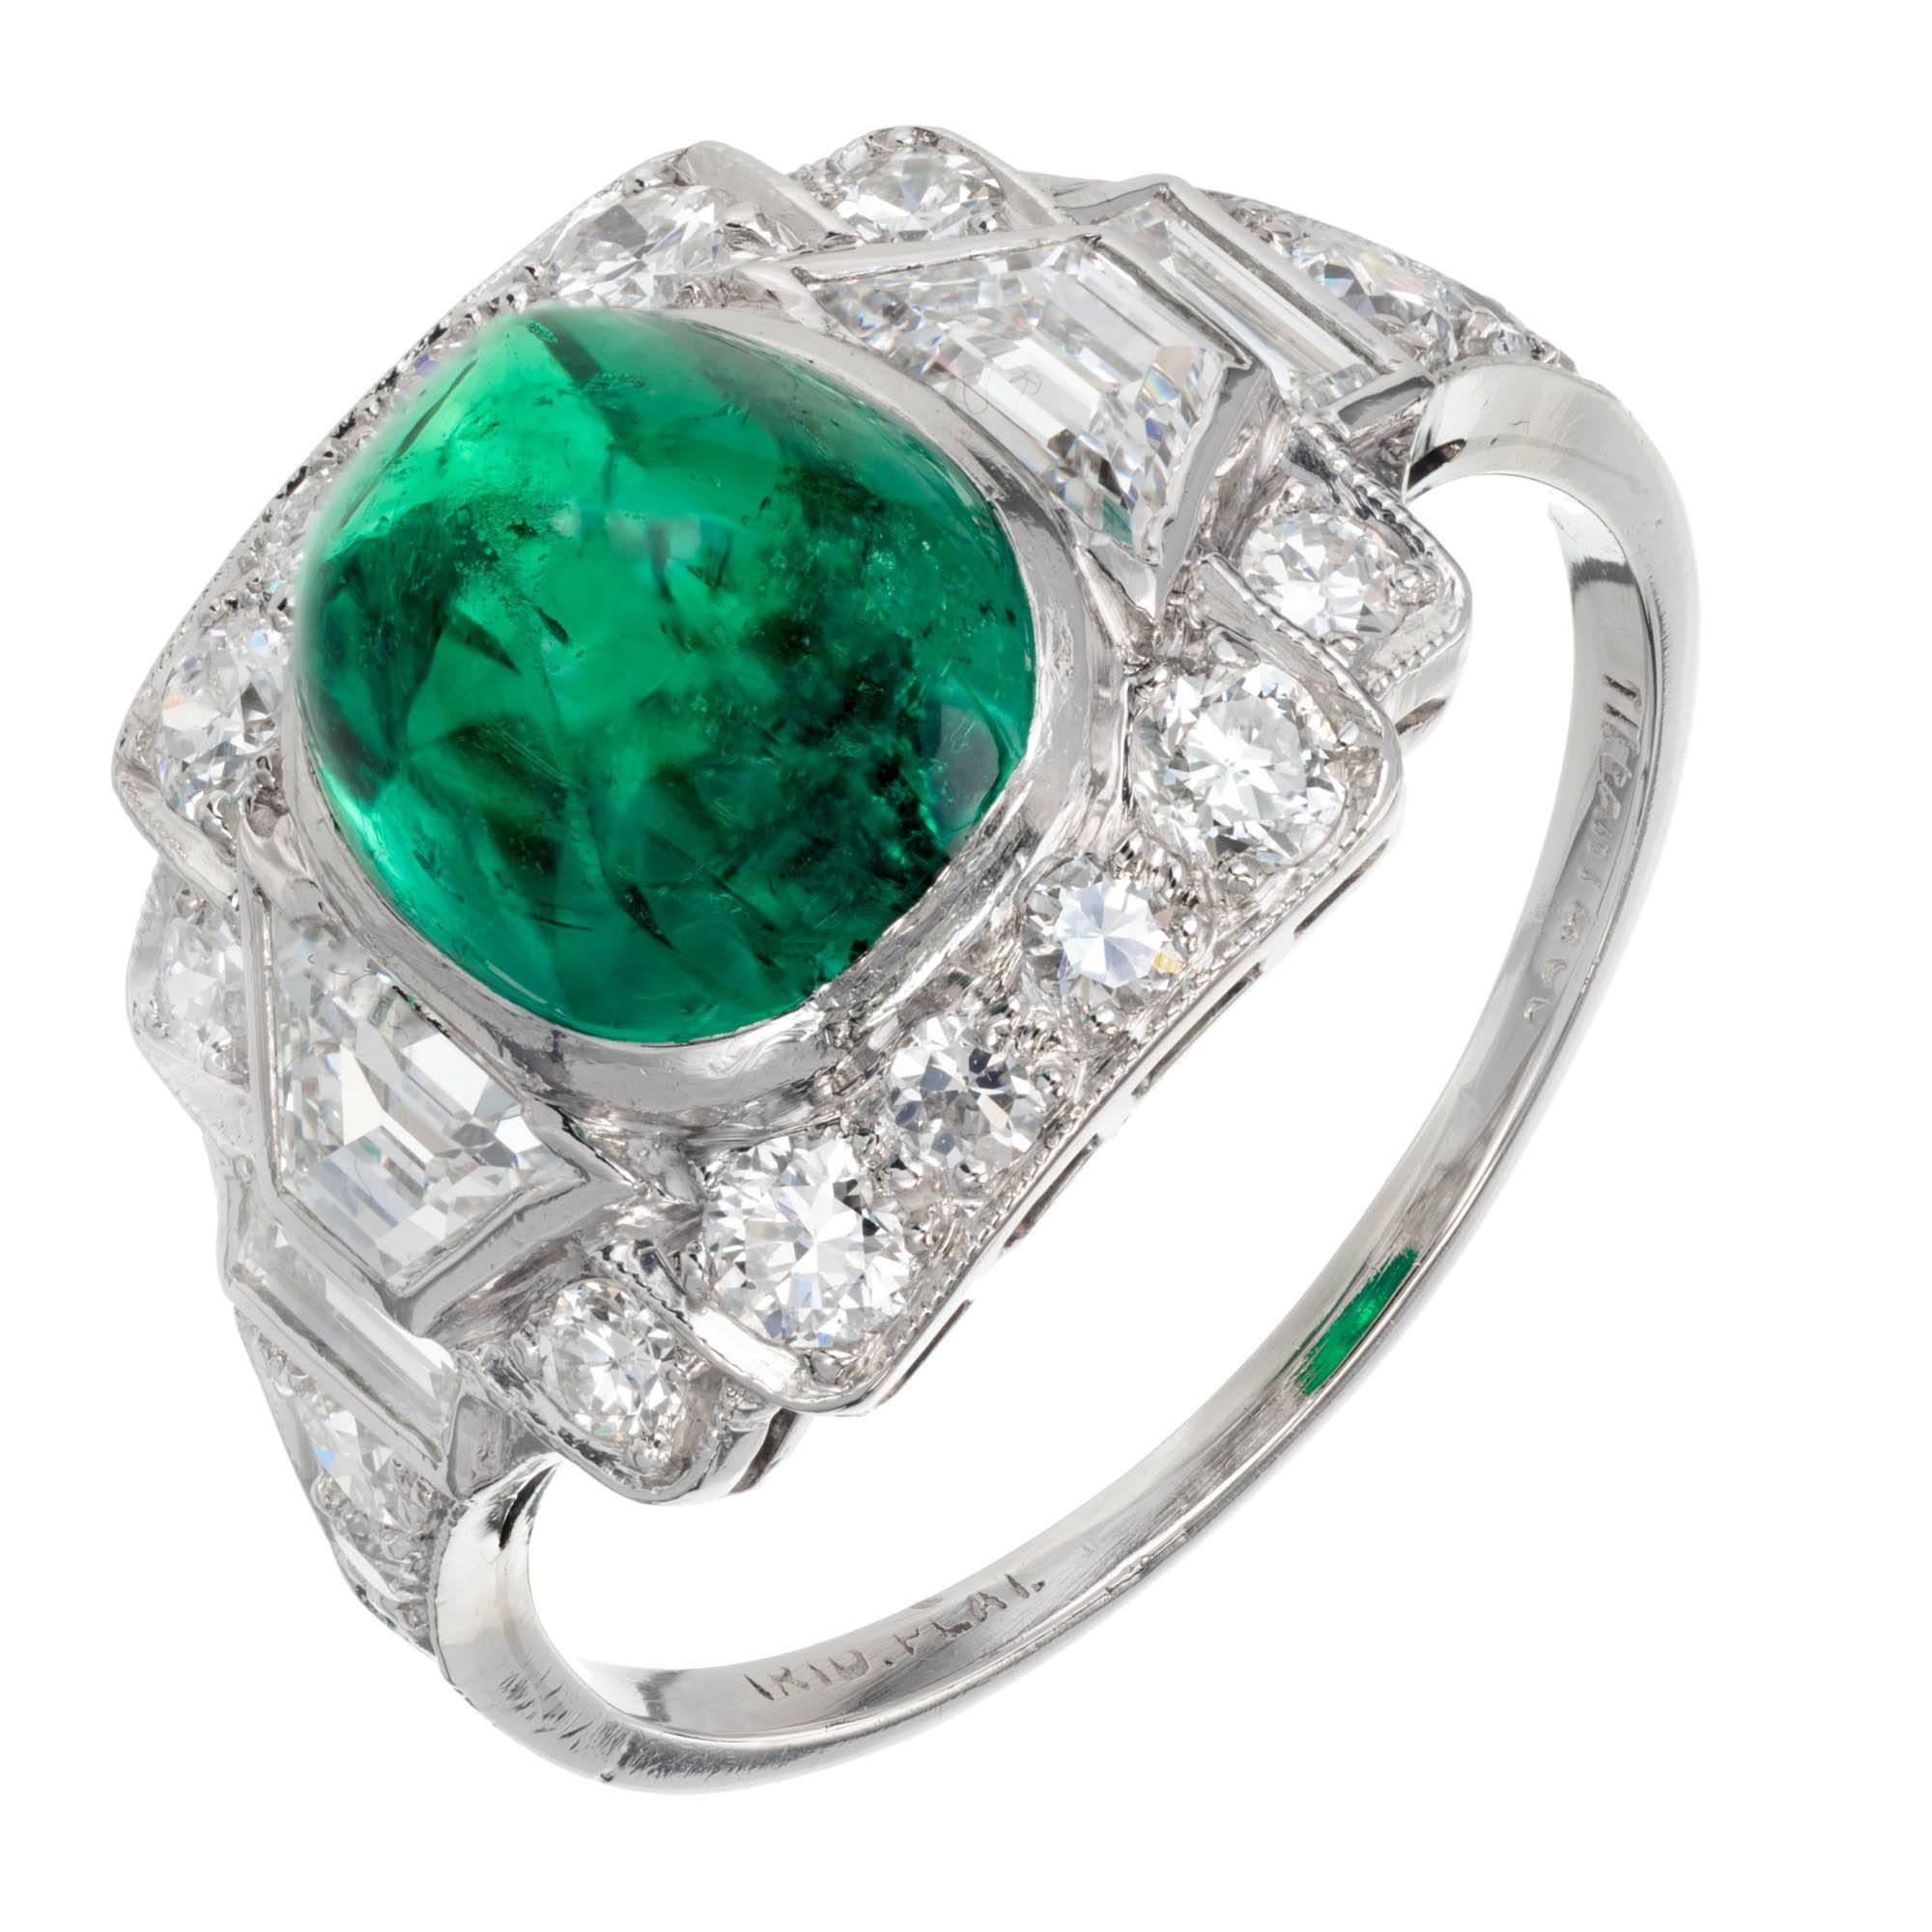 Original early 1900s Tiffany & Co Emerald and diamond Art Deco cocktail ring. Approx. 1910. Platinum setting with a high dome sugar loaf cabochon cut GIA certified natural Colombian Emerald and accent side diamonds.. Partially worn but readable